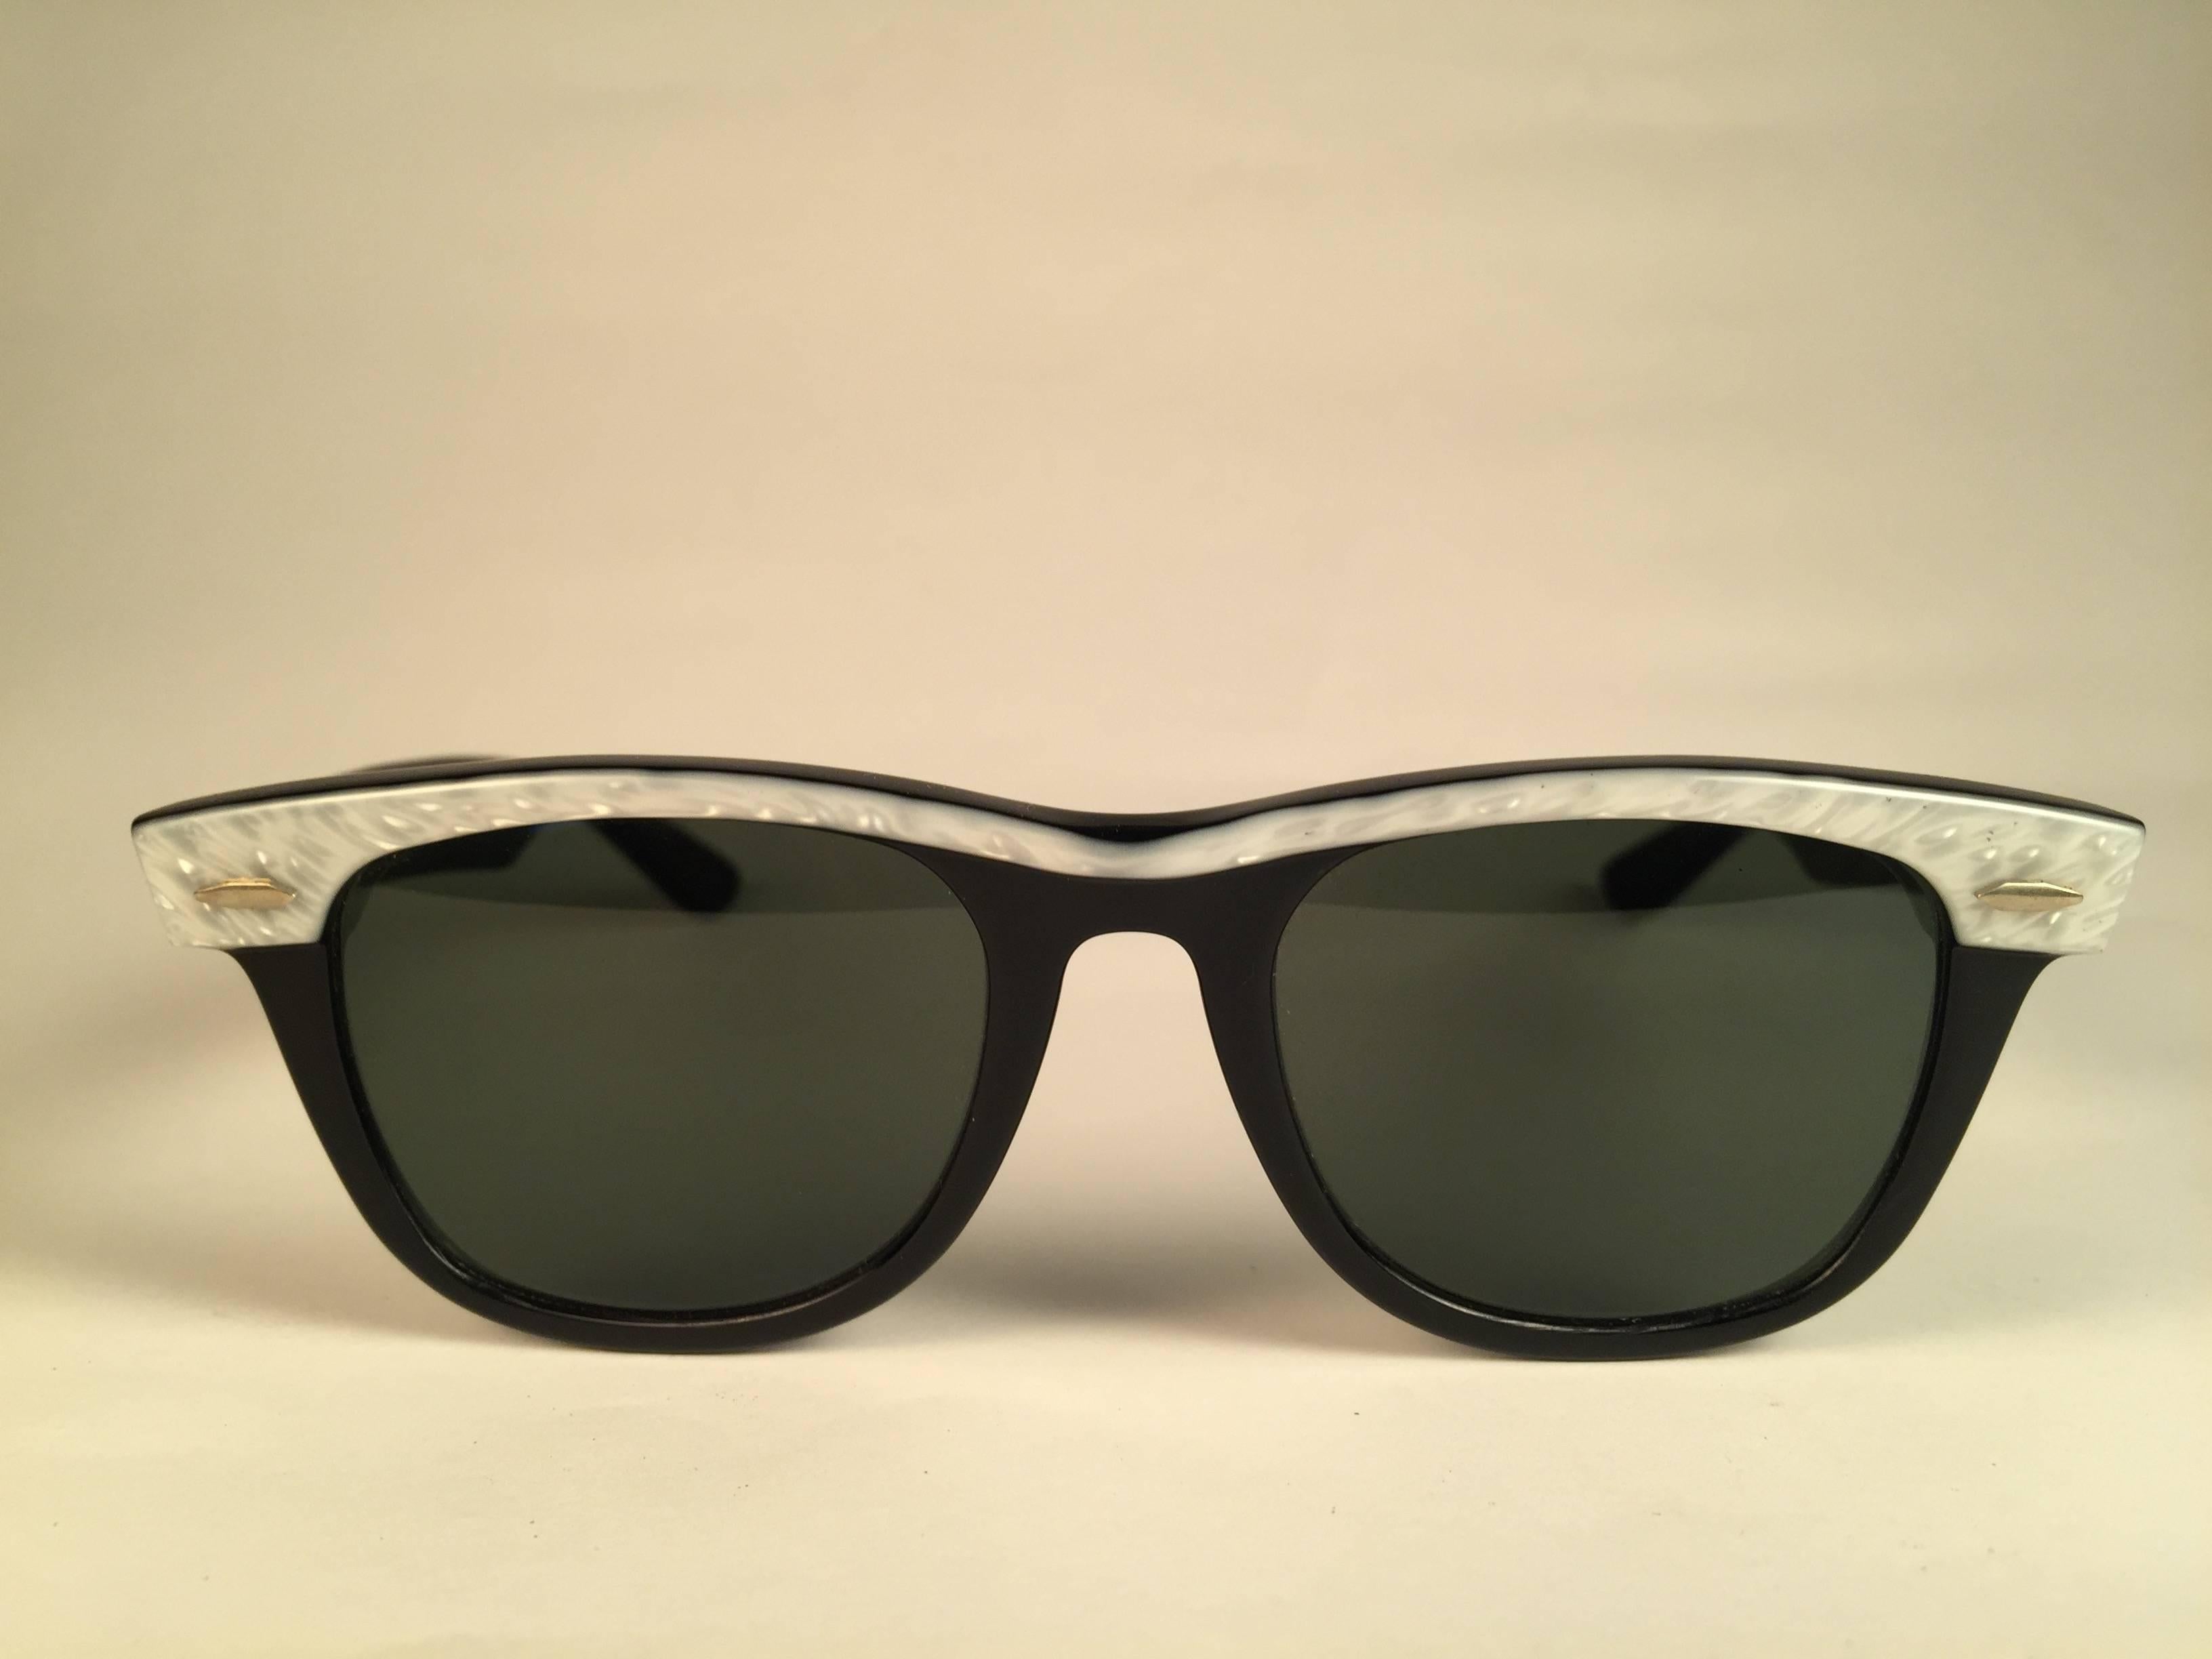 Vintage classic Wayfarer in white & black. B&L etched in both G15 grey lenses. Please notice that this item is nearly 40 years old and could show some storage wear.  
New, ever worn or displayed.